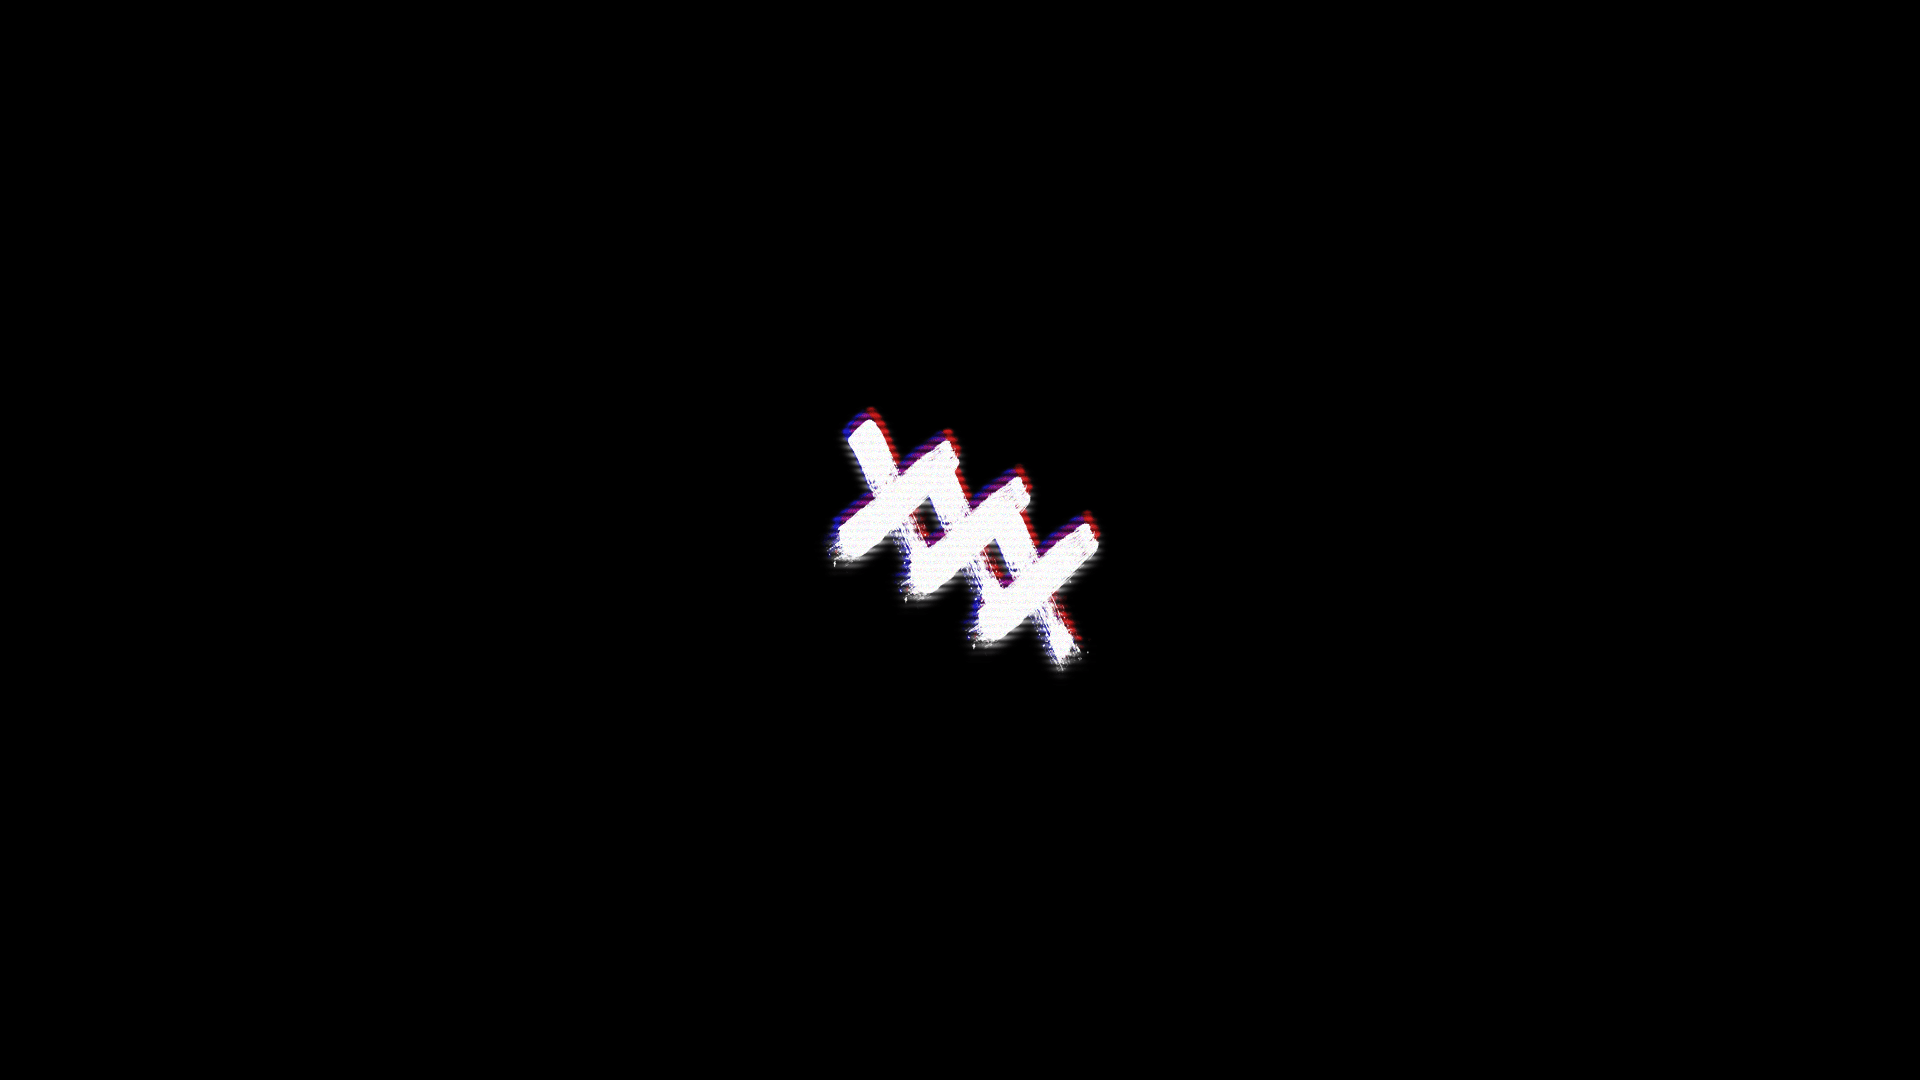 A black background with a white and red graphic of a lightning bolt in the center. - XXXTentacion